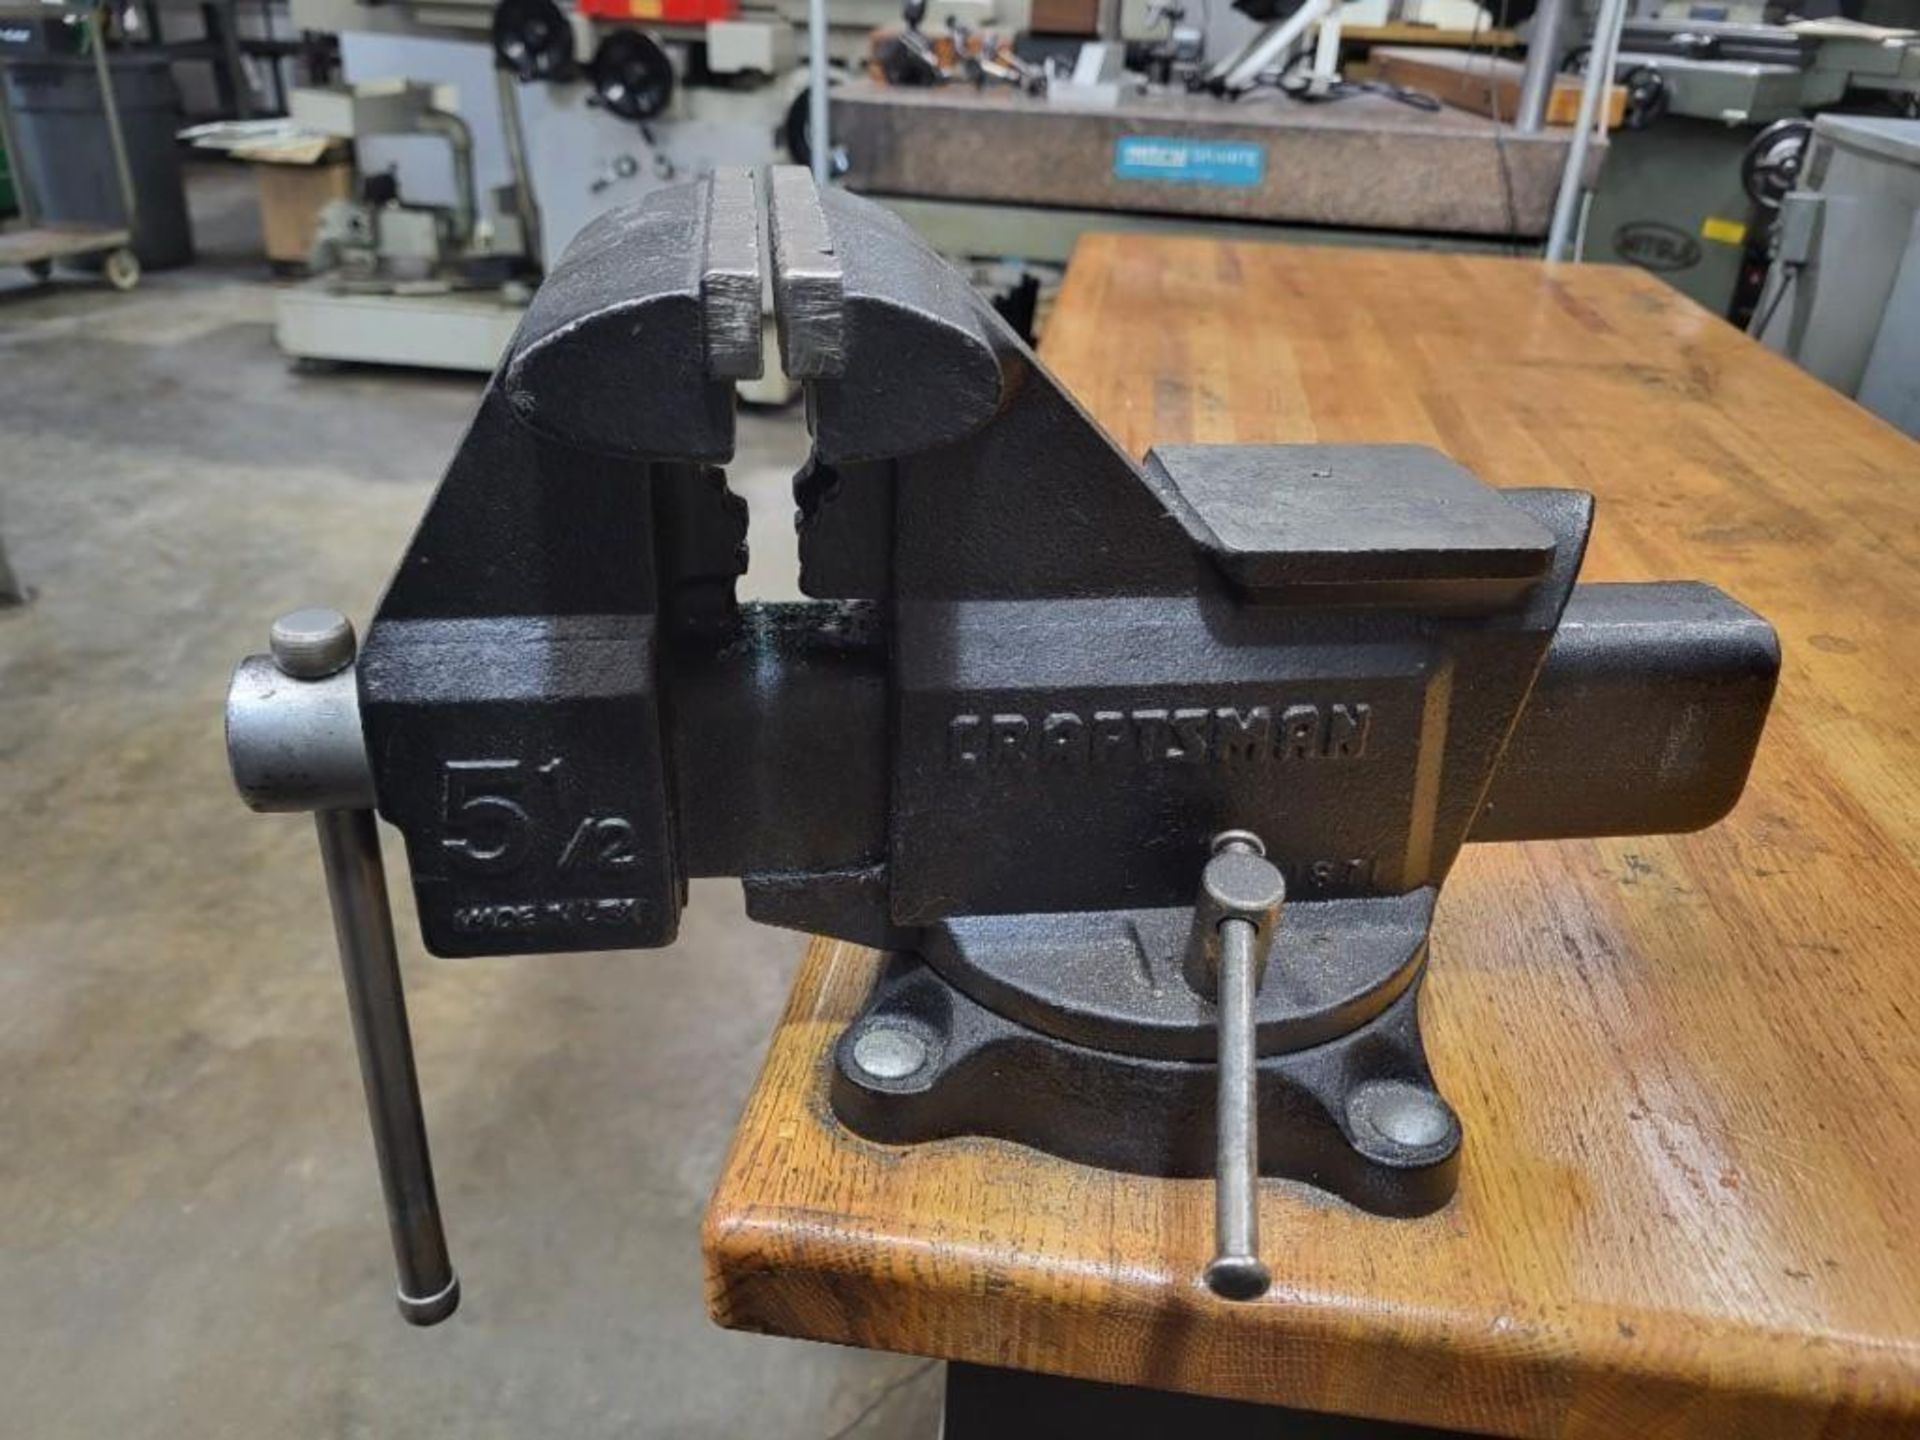 KENNEDY WORKBENCH WITH CONTENTS (EDM TOOLING) CRAFTSMAN VISE - Image 8 of 11